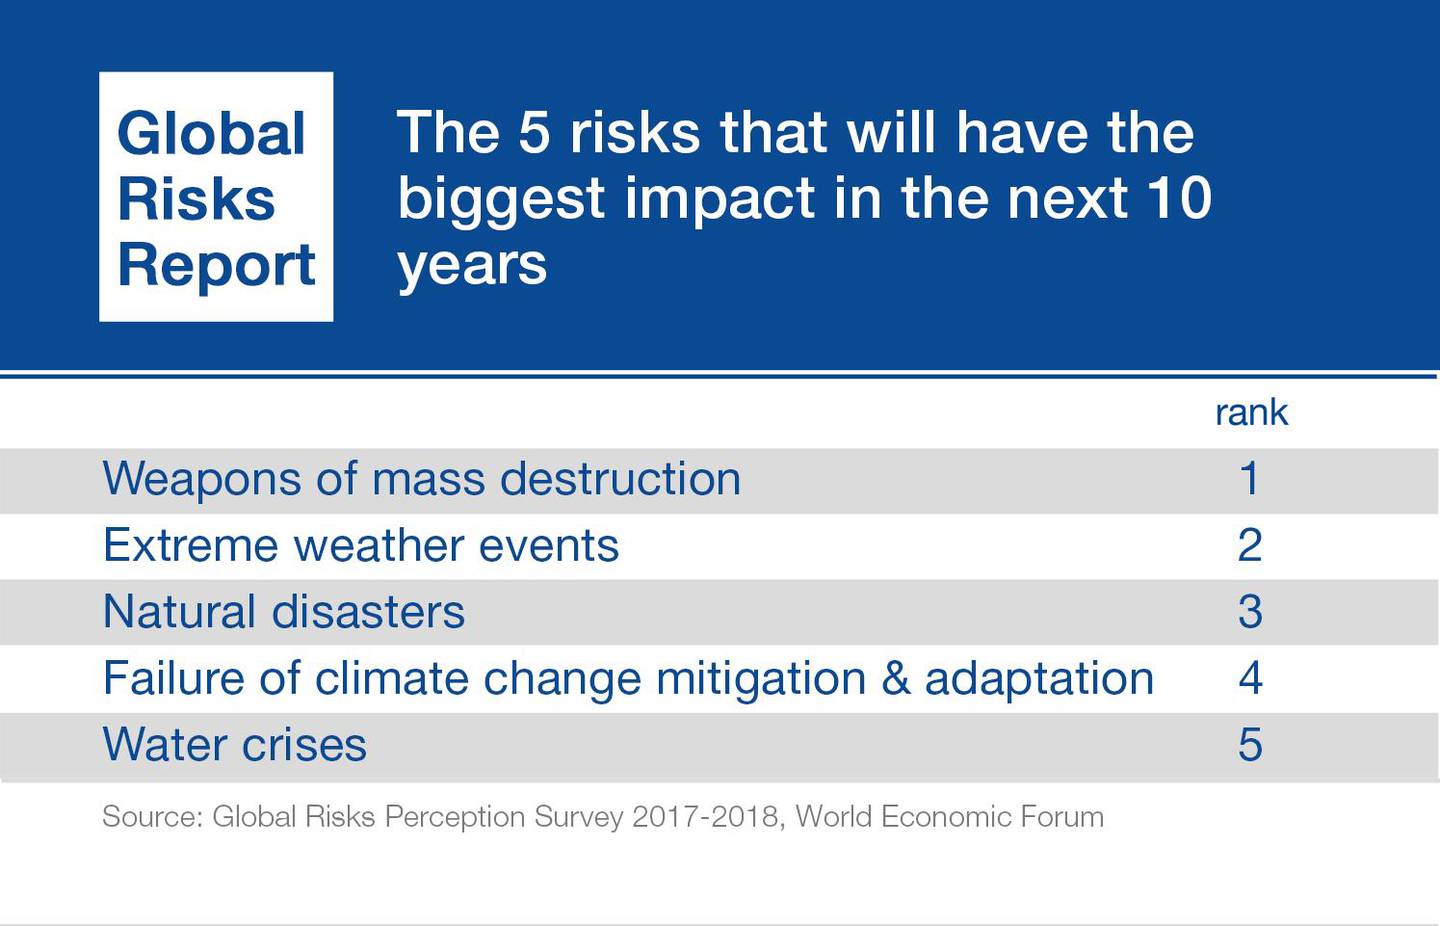 WEF's survey found that weapons of mass destruction were seen as having the biggest impact in the next ten years. WEF